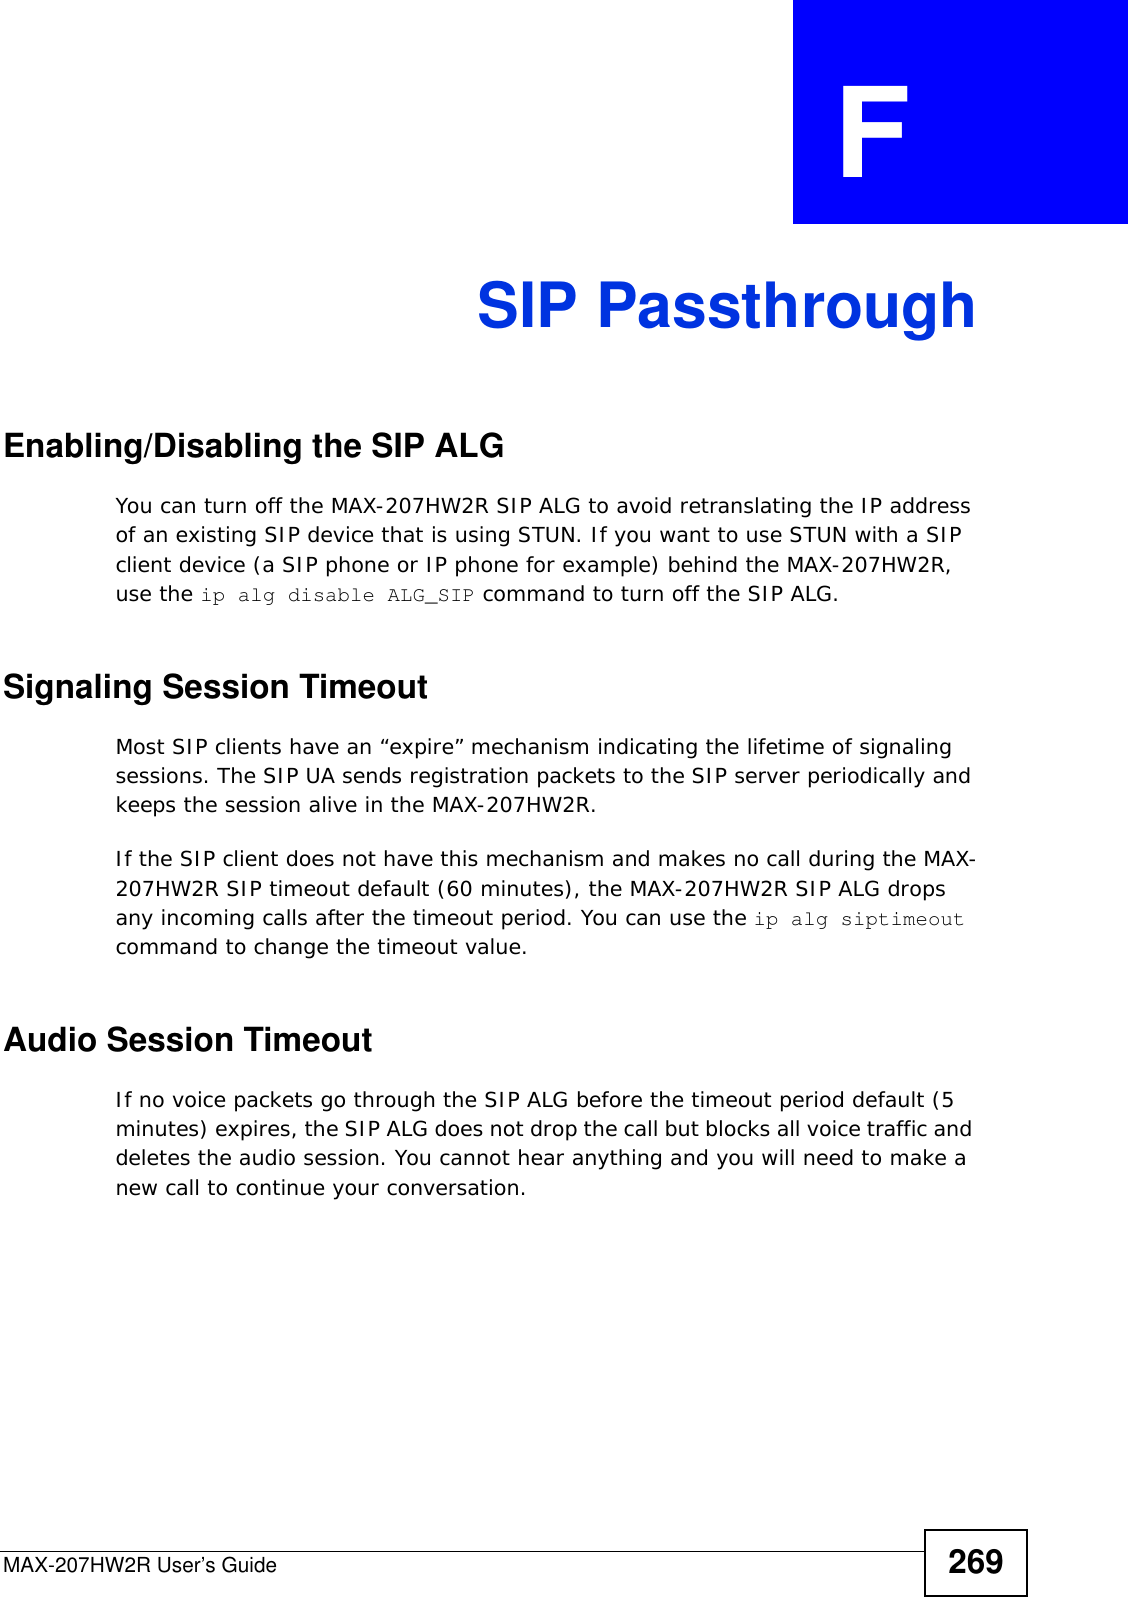 MAX-207HW2R User’s Guide 269APPENDIX  F  SIP PassthroughEnabling/Disabling the SIP ALGYou can turn off the MAX-207HW2R SIP ALG to avoid retranslating the IP address of an existing SIP device that is using STUN. If you want to use STUN with a SIP client device (a SIP phone or IP phone for example) behind the MAX-207HW2R, use the ip alg disable ALG_SIP command to turn off the SIP ALG.Signaling Session TimeoutMost SIP clients have an “expire” mechanism indicating the lifetime of signaling sessions. The SIP UA sends registration packets to the SIP server periodically and keeps the session alive in the MAX-207HW2R. If the SIP client does not have this mechanism and makes no call during the MAX-207HW2R SIP timeout default (60 minutes), the MAX-207HW2R SIP ALG drops any incoming calls after the timeout period. You can use the ip alg siptimeout command to change the timeout value.Audio Session TimeoutIf no voice packets go through the SIP ALG before the timeout period default (5 minutes) expires, the SIP ALG does not drop the call but blocks all voice traffic and deletes the audio session. You cannot hear anything and you will need to make a new call to continue your conversation.